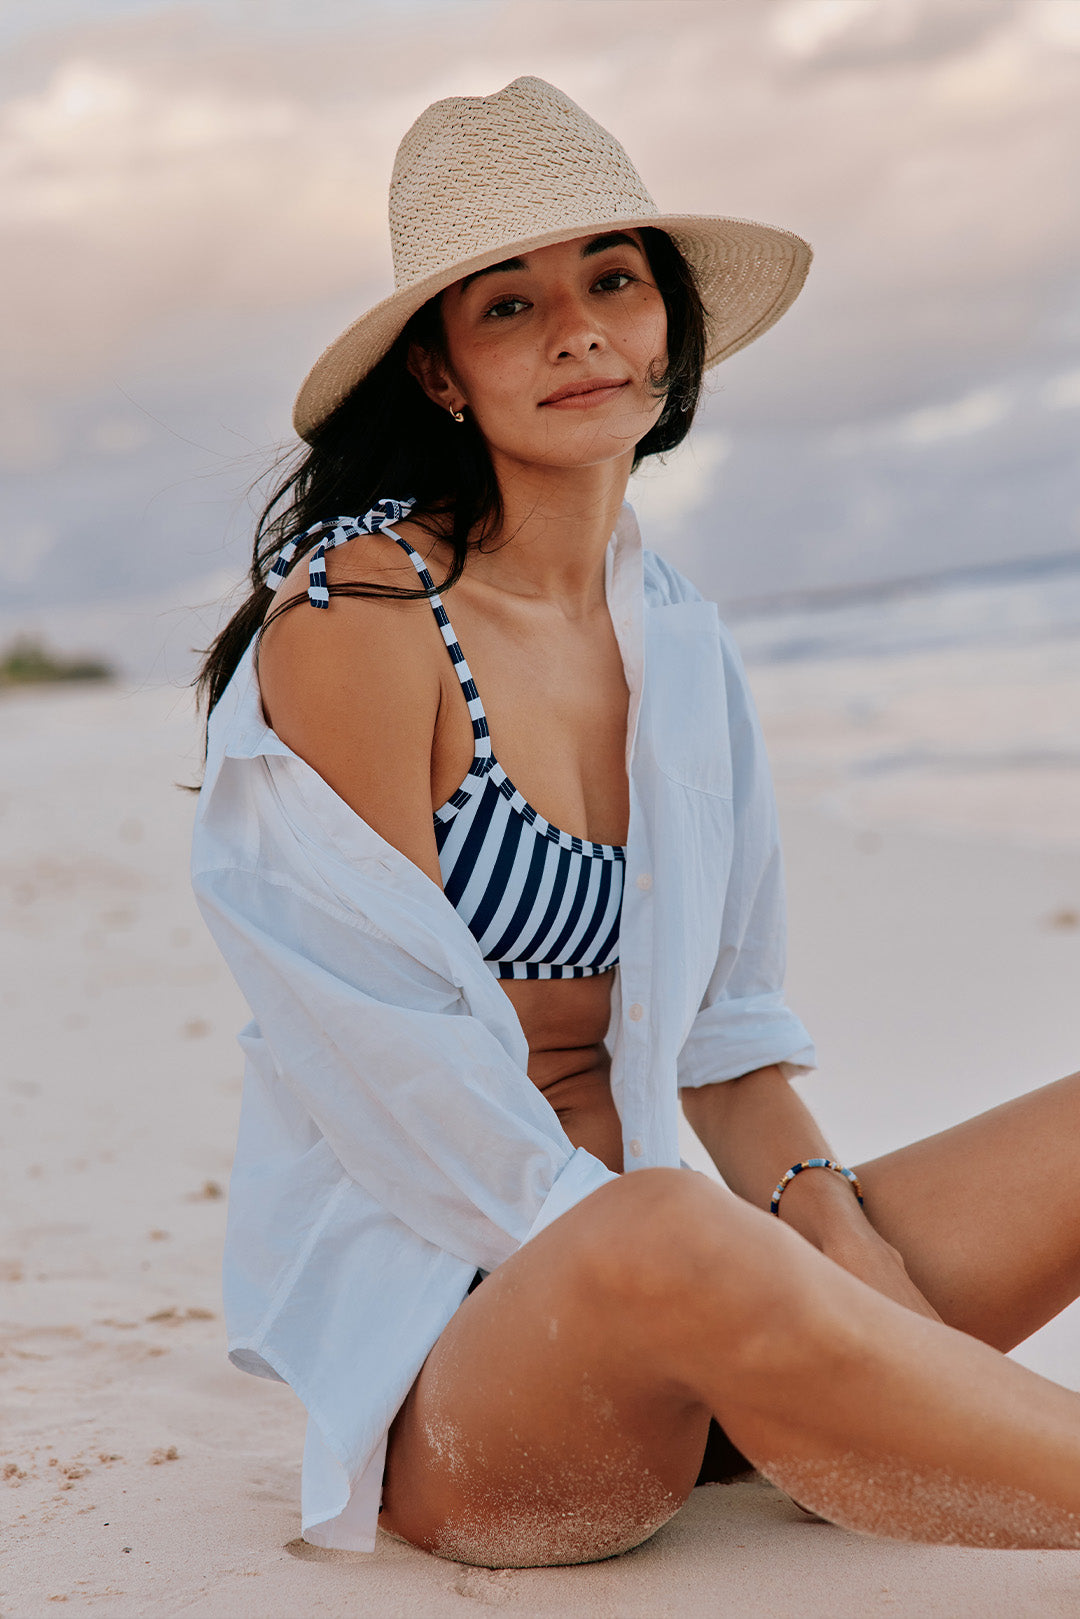 Woman on the beach in a striped bikini and white coverup wearing a hat.